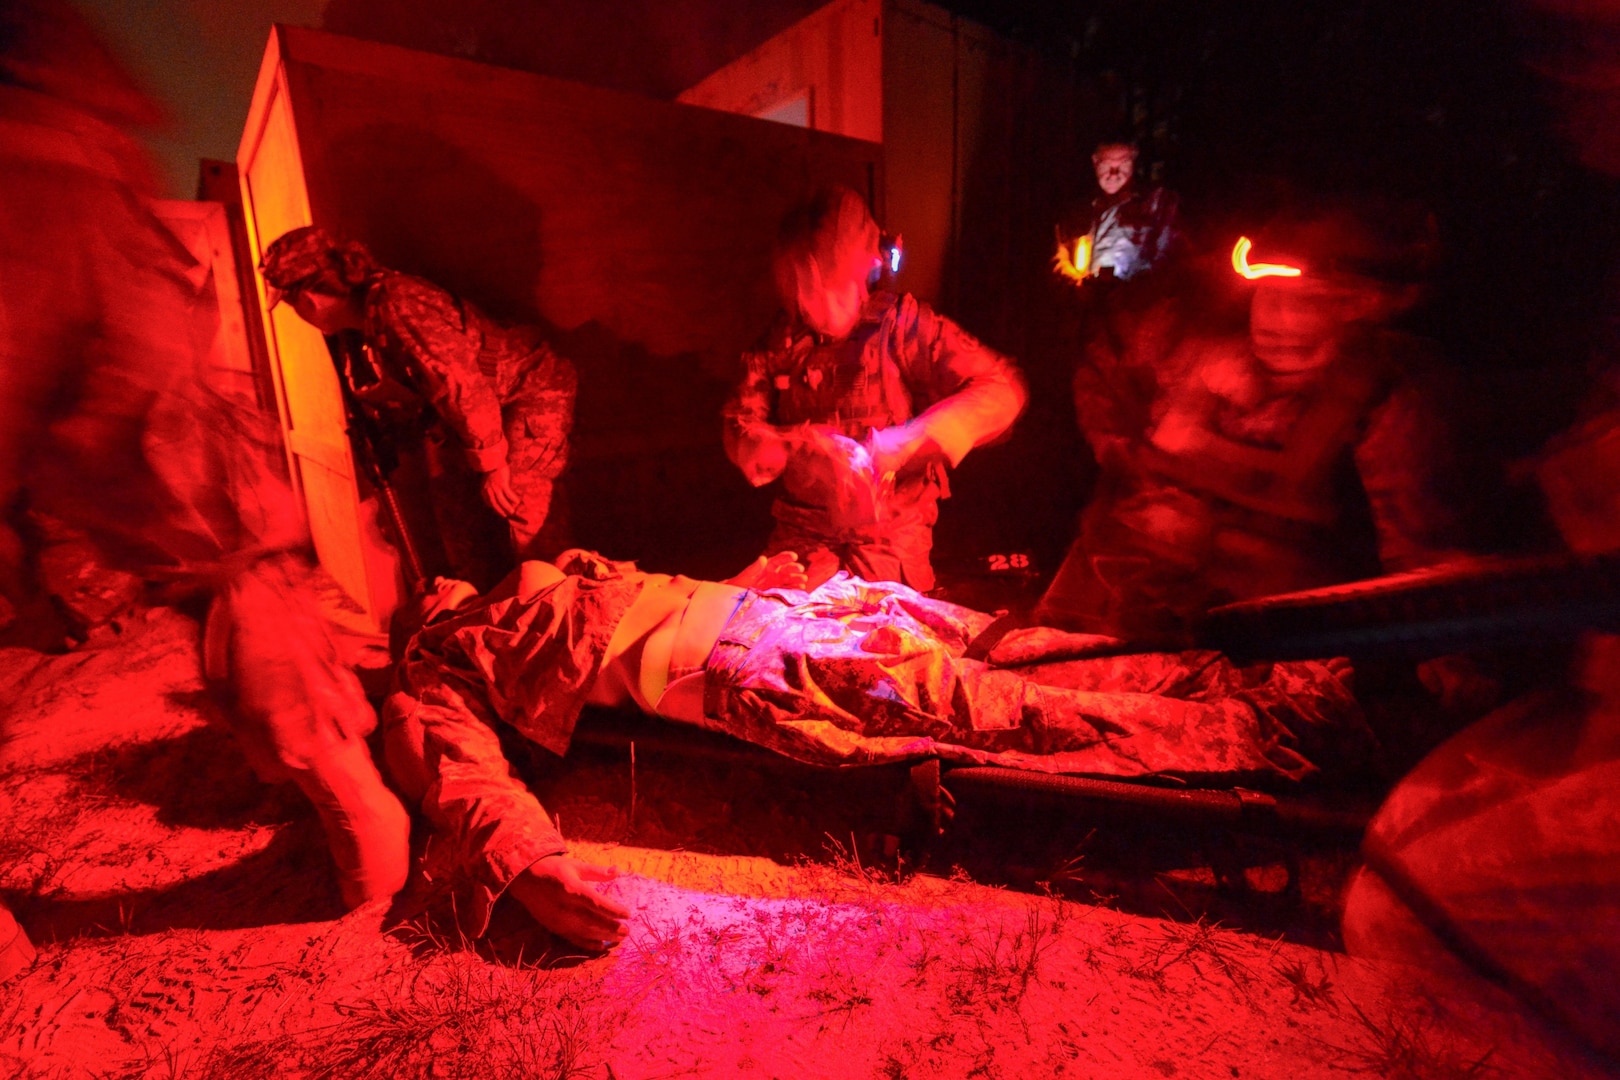 U.S. Army medics assigned to the South Carolina Army National Guard, conduct combat medical training during a sensory deprivation exercise